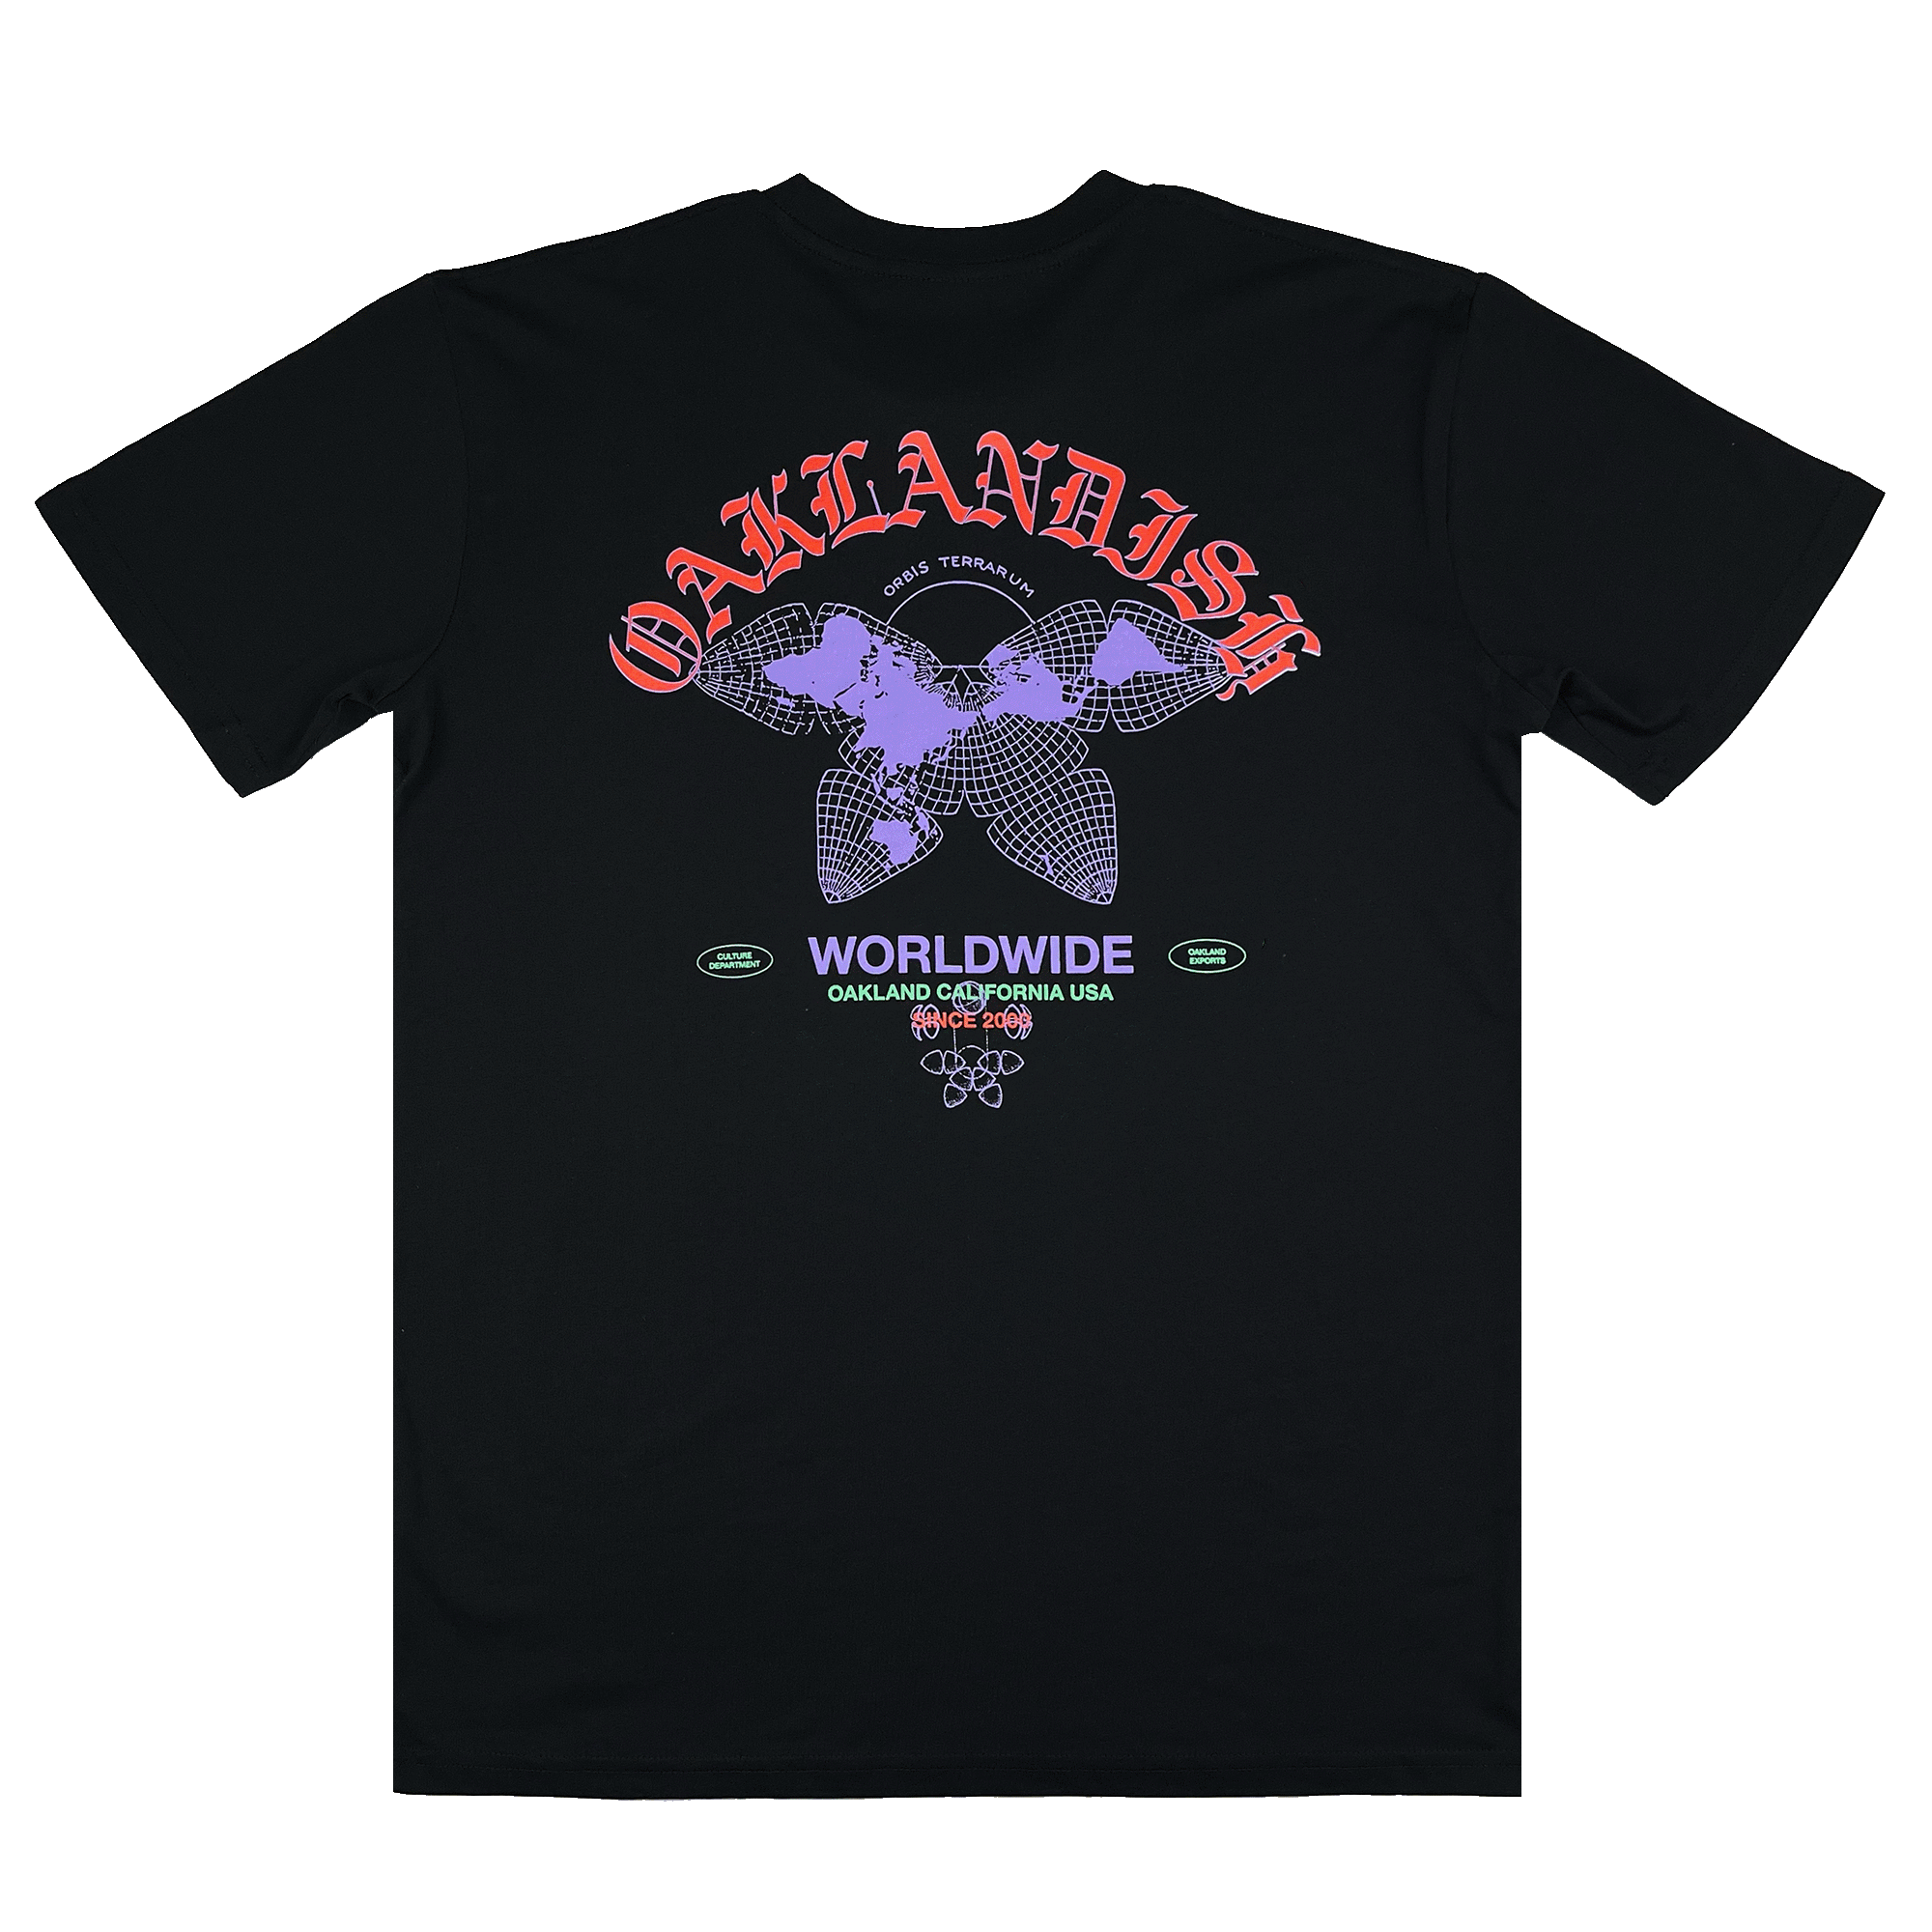 The backside of a black t-shirt with a large red, purple, and green Oaklandish worldwide graphic.